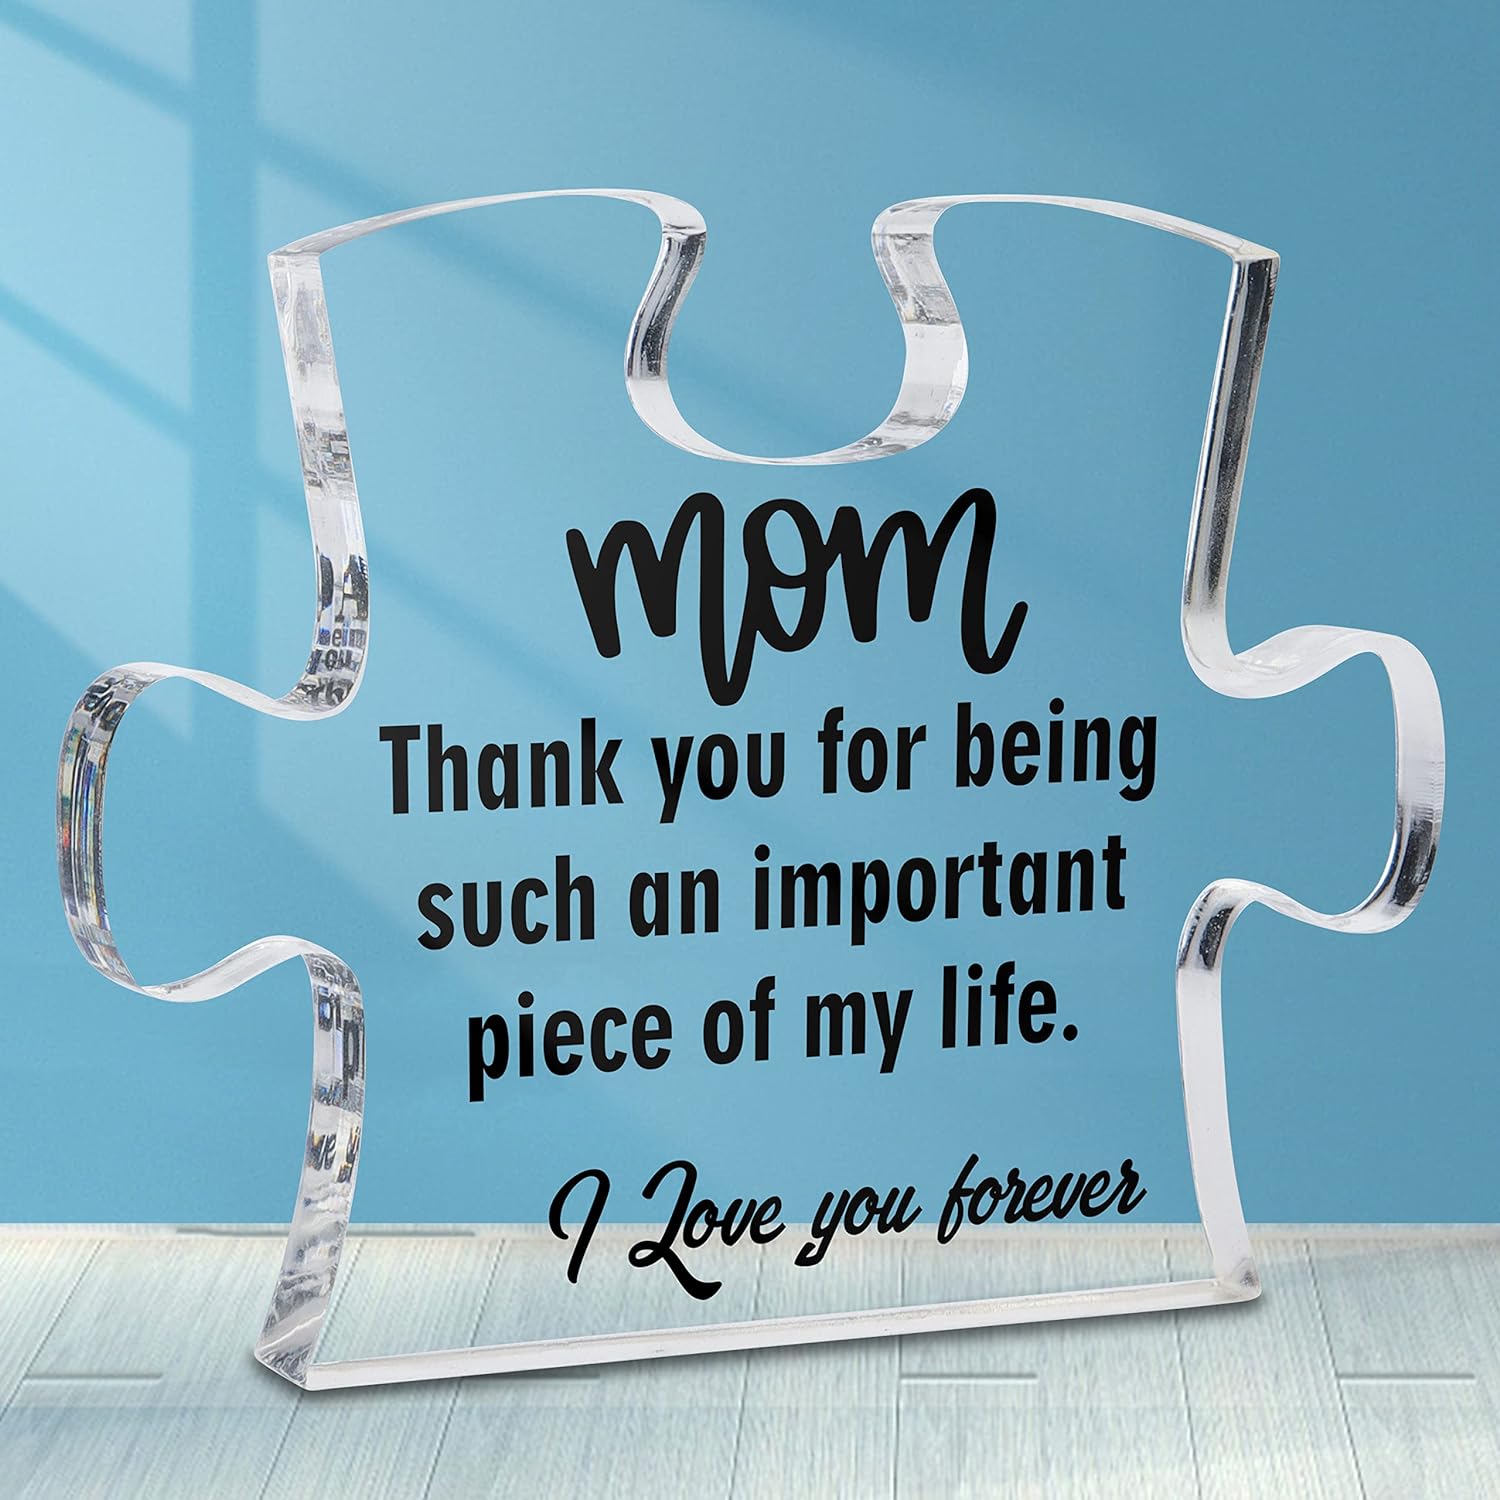 Moyel Gifts for Mom Puzzle Acrylic Plaque Ornaments Mom Gifts from Daughter Son Kids Mother Presents Christmas Birthday Gifts for Mom Mothers Day Valentines Day Gift Ideas for Mom